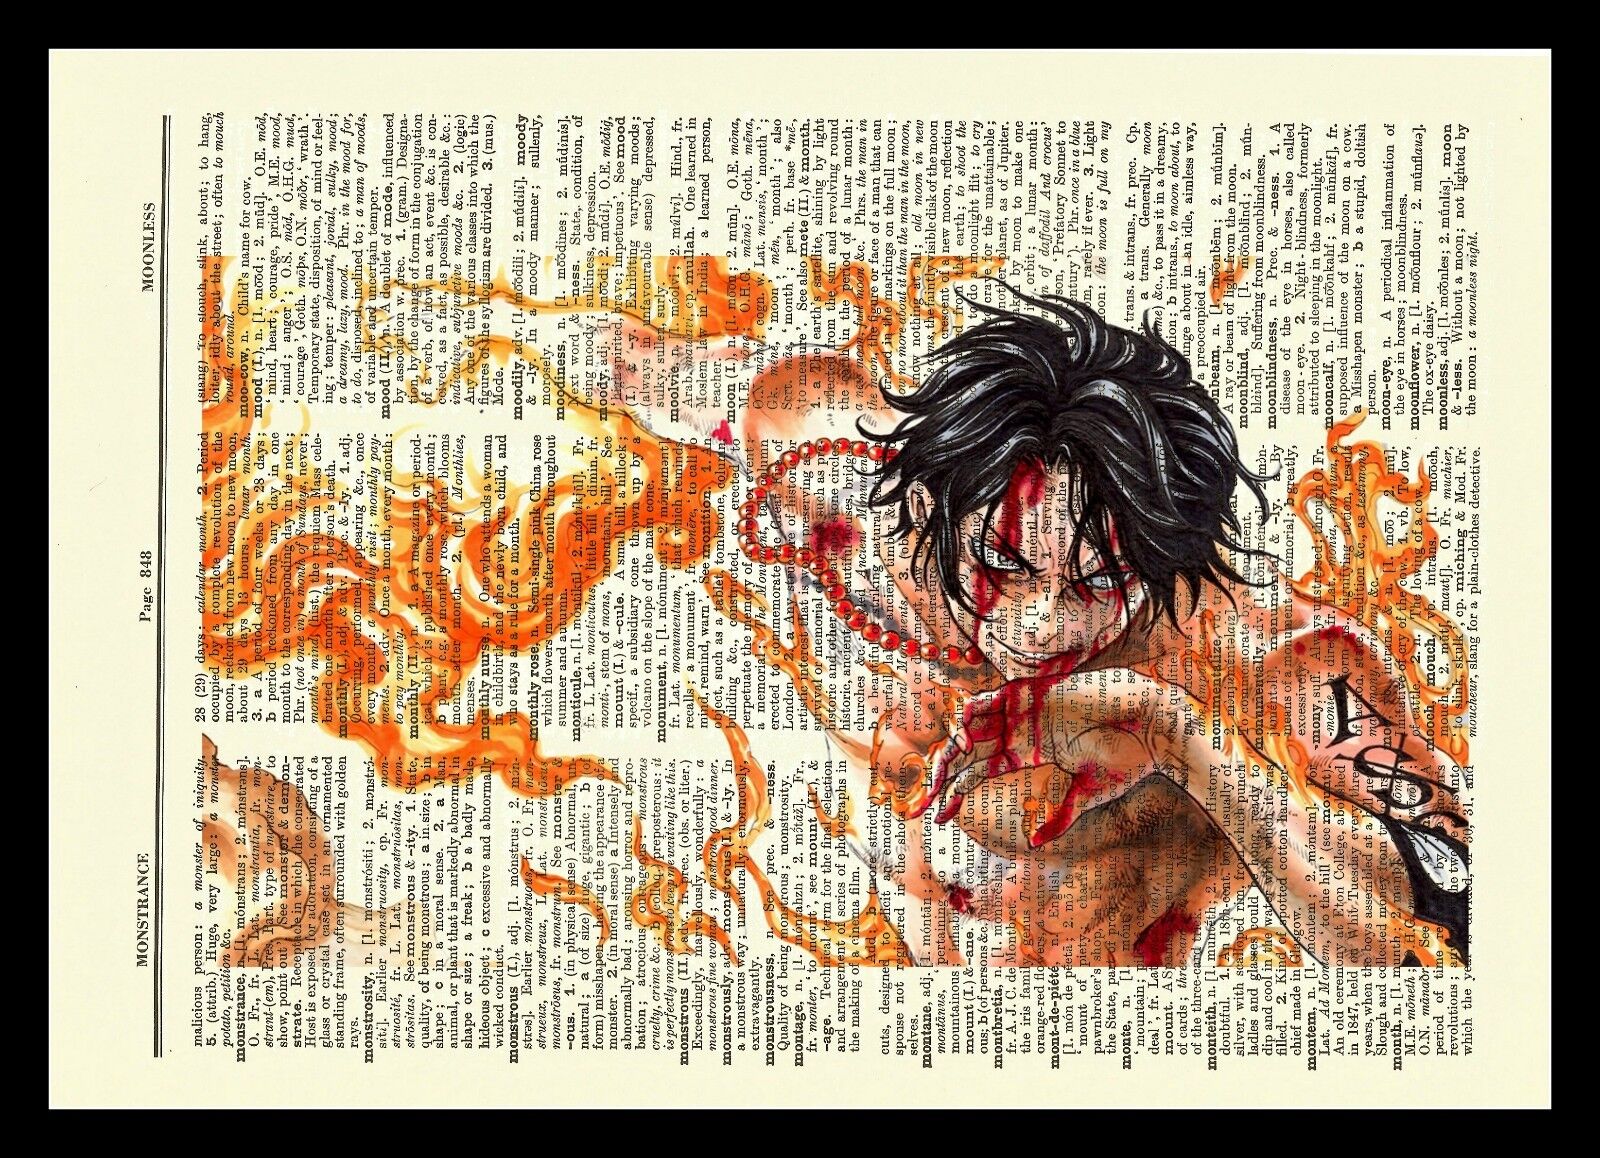 One Piece Ace Anime Dictionary Art Print Poster Picture Manga Book Luffy Brother